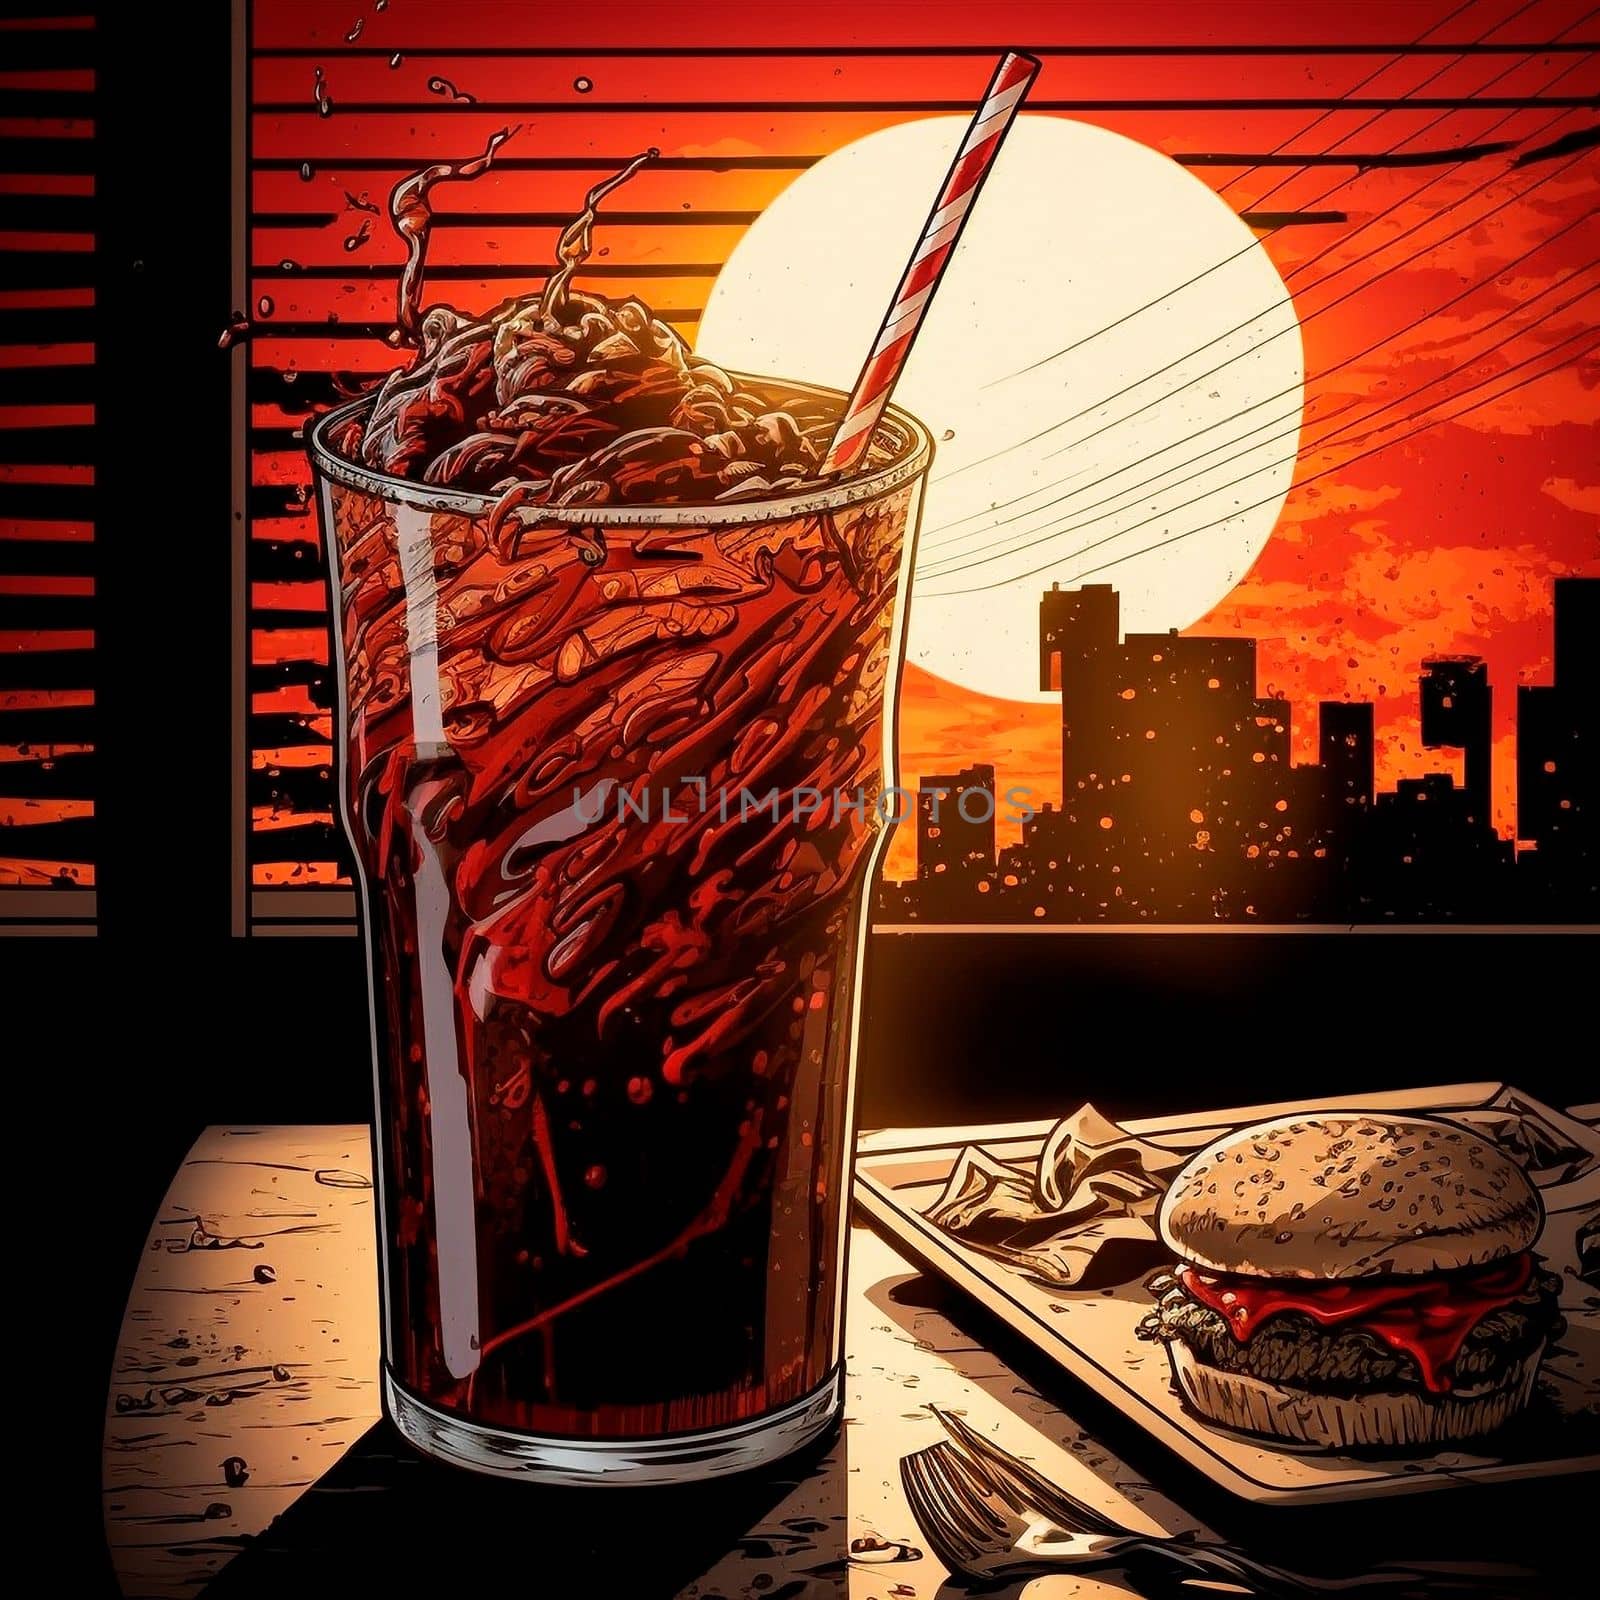 An image of a glass of cola on the table in an old diner. Comic style by NeuroSky